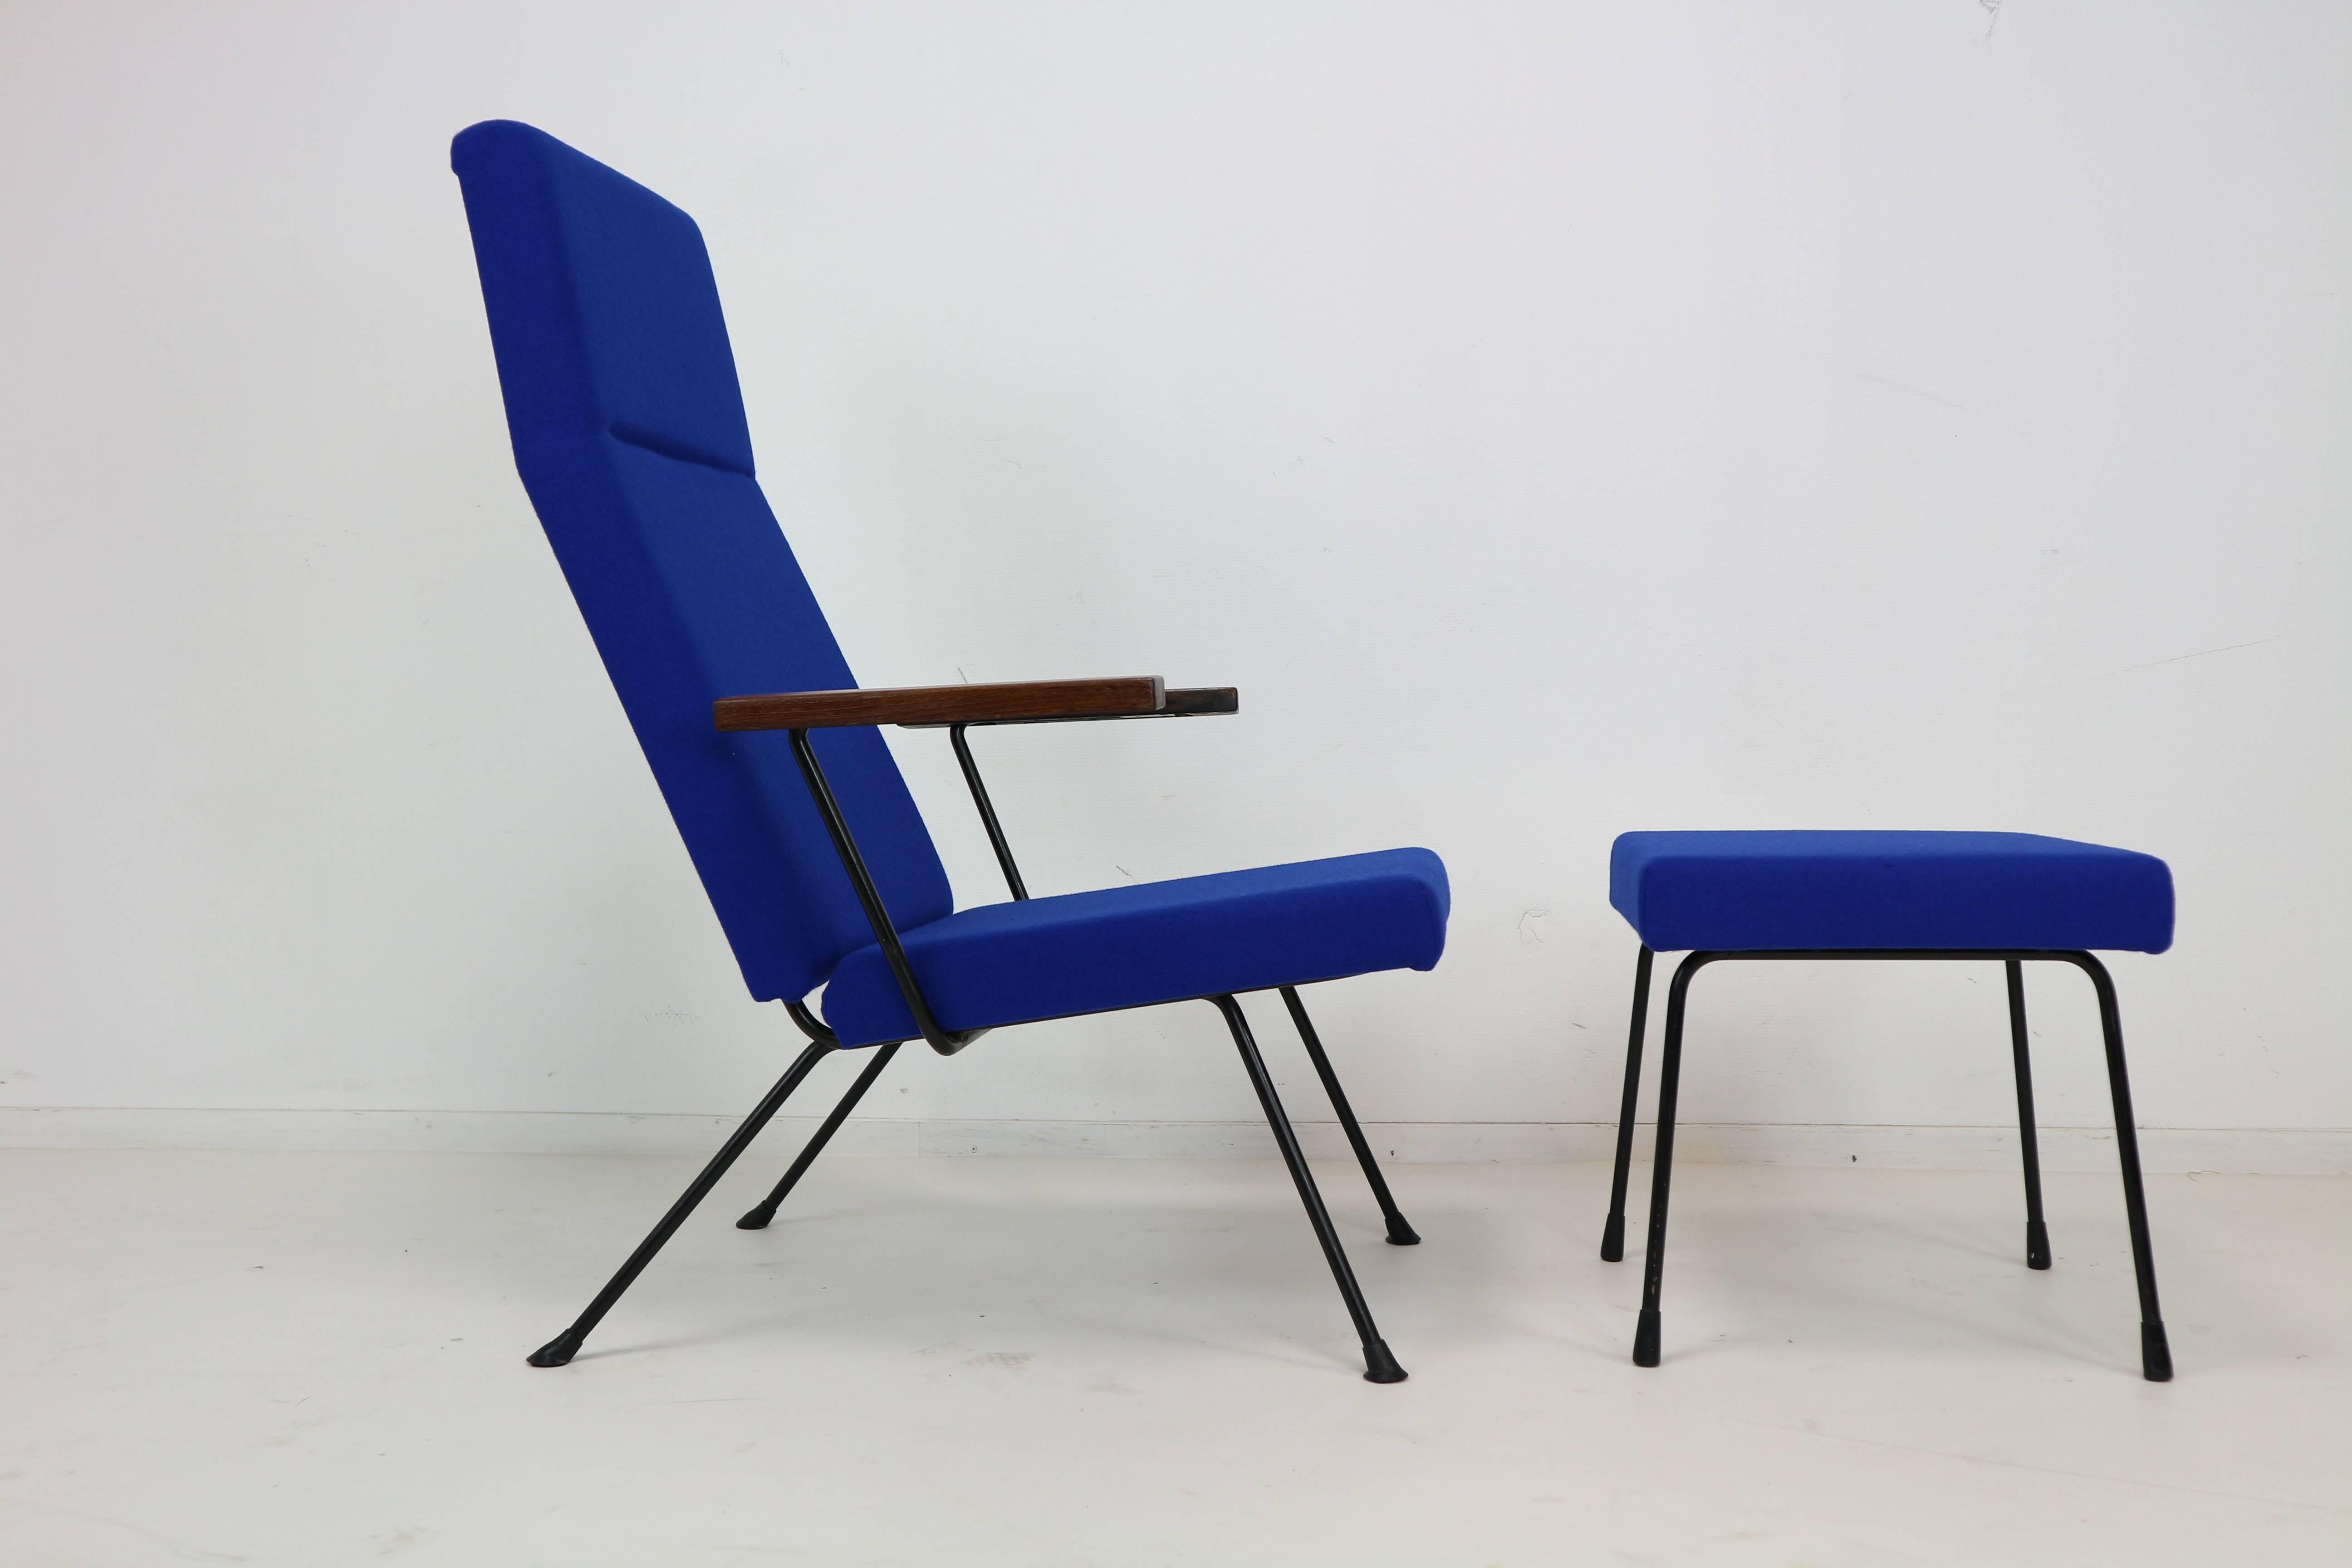 A.R. Cordemeyer 1410 easy chair designed for Gispen in 1959. This chair has been re-upholstered in a cobalt blue high quality, wool fabric. The black metal frame and solid wenge armrests are all in very good condition. This chair comes with the